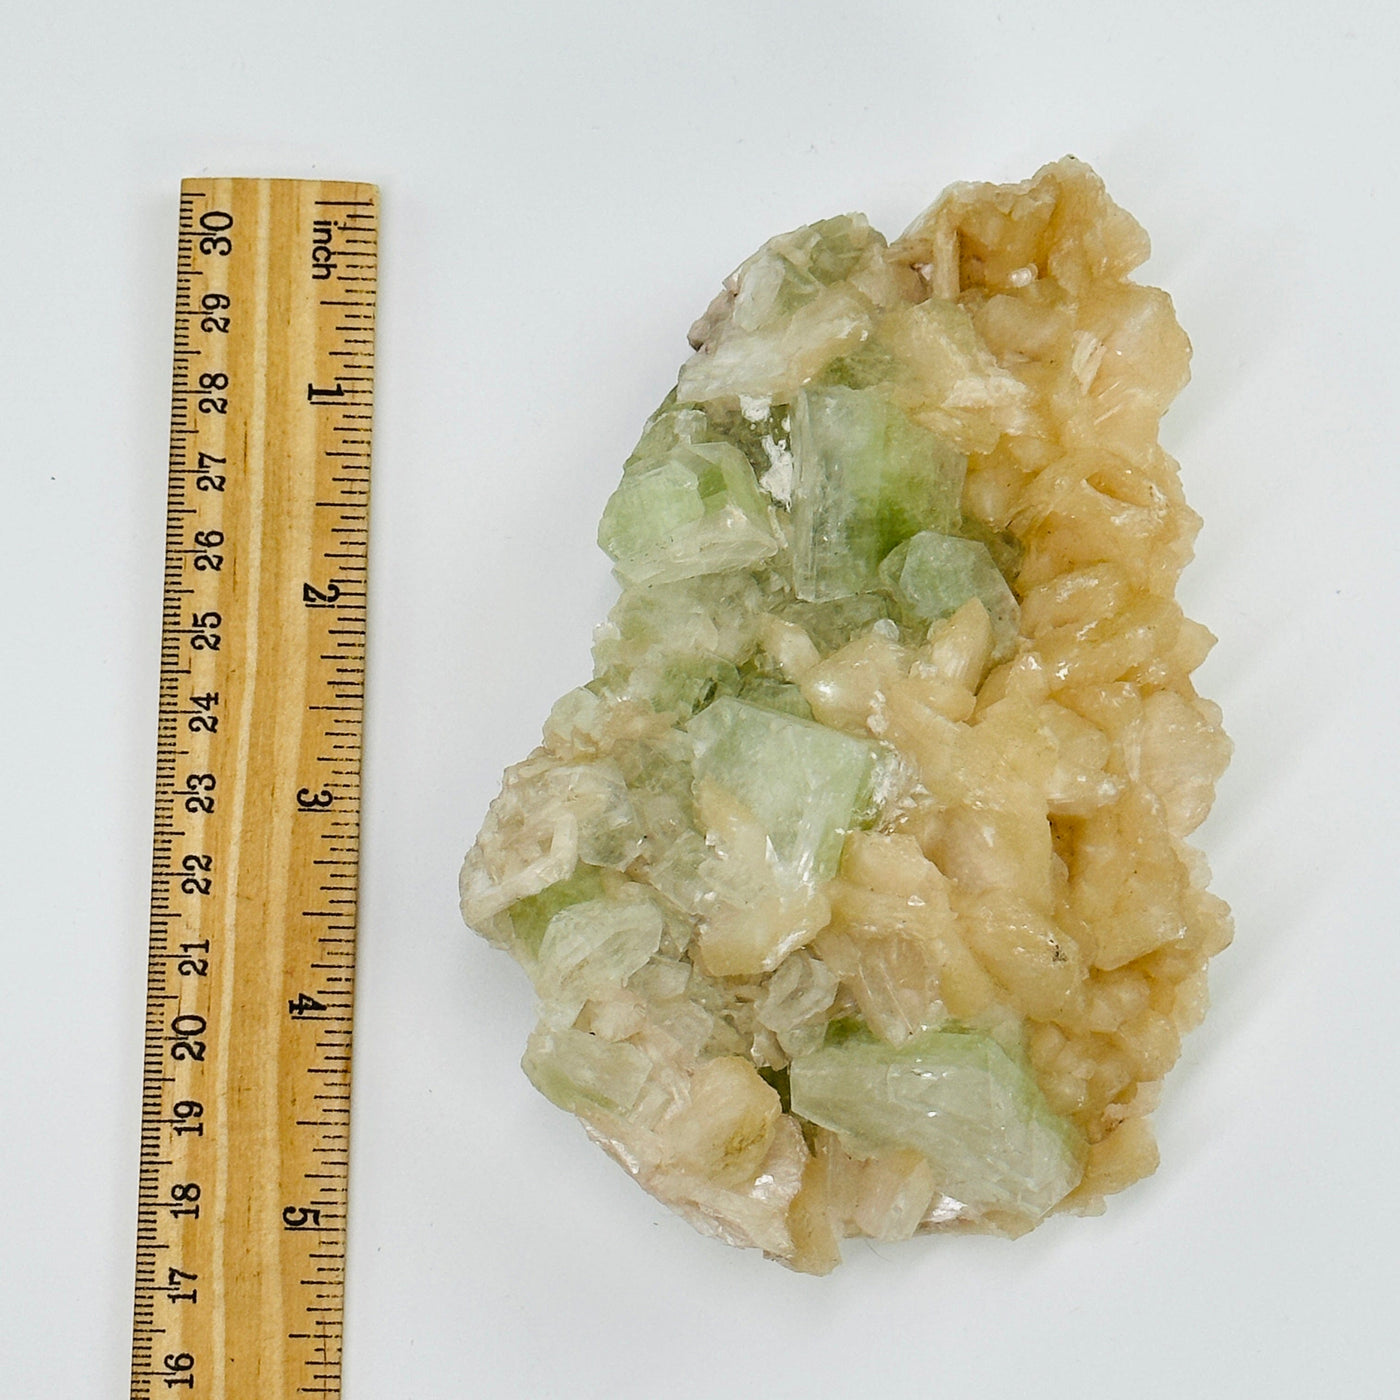 green apophyllite with stilbite next to a ruler for size reference